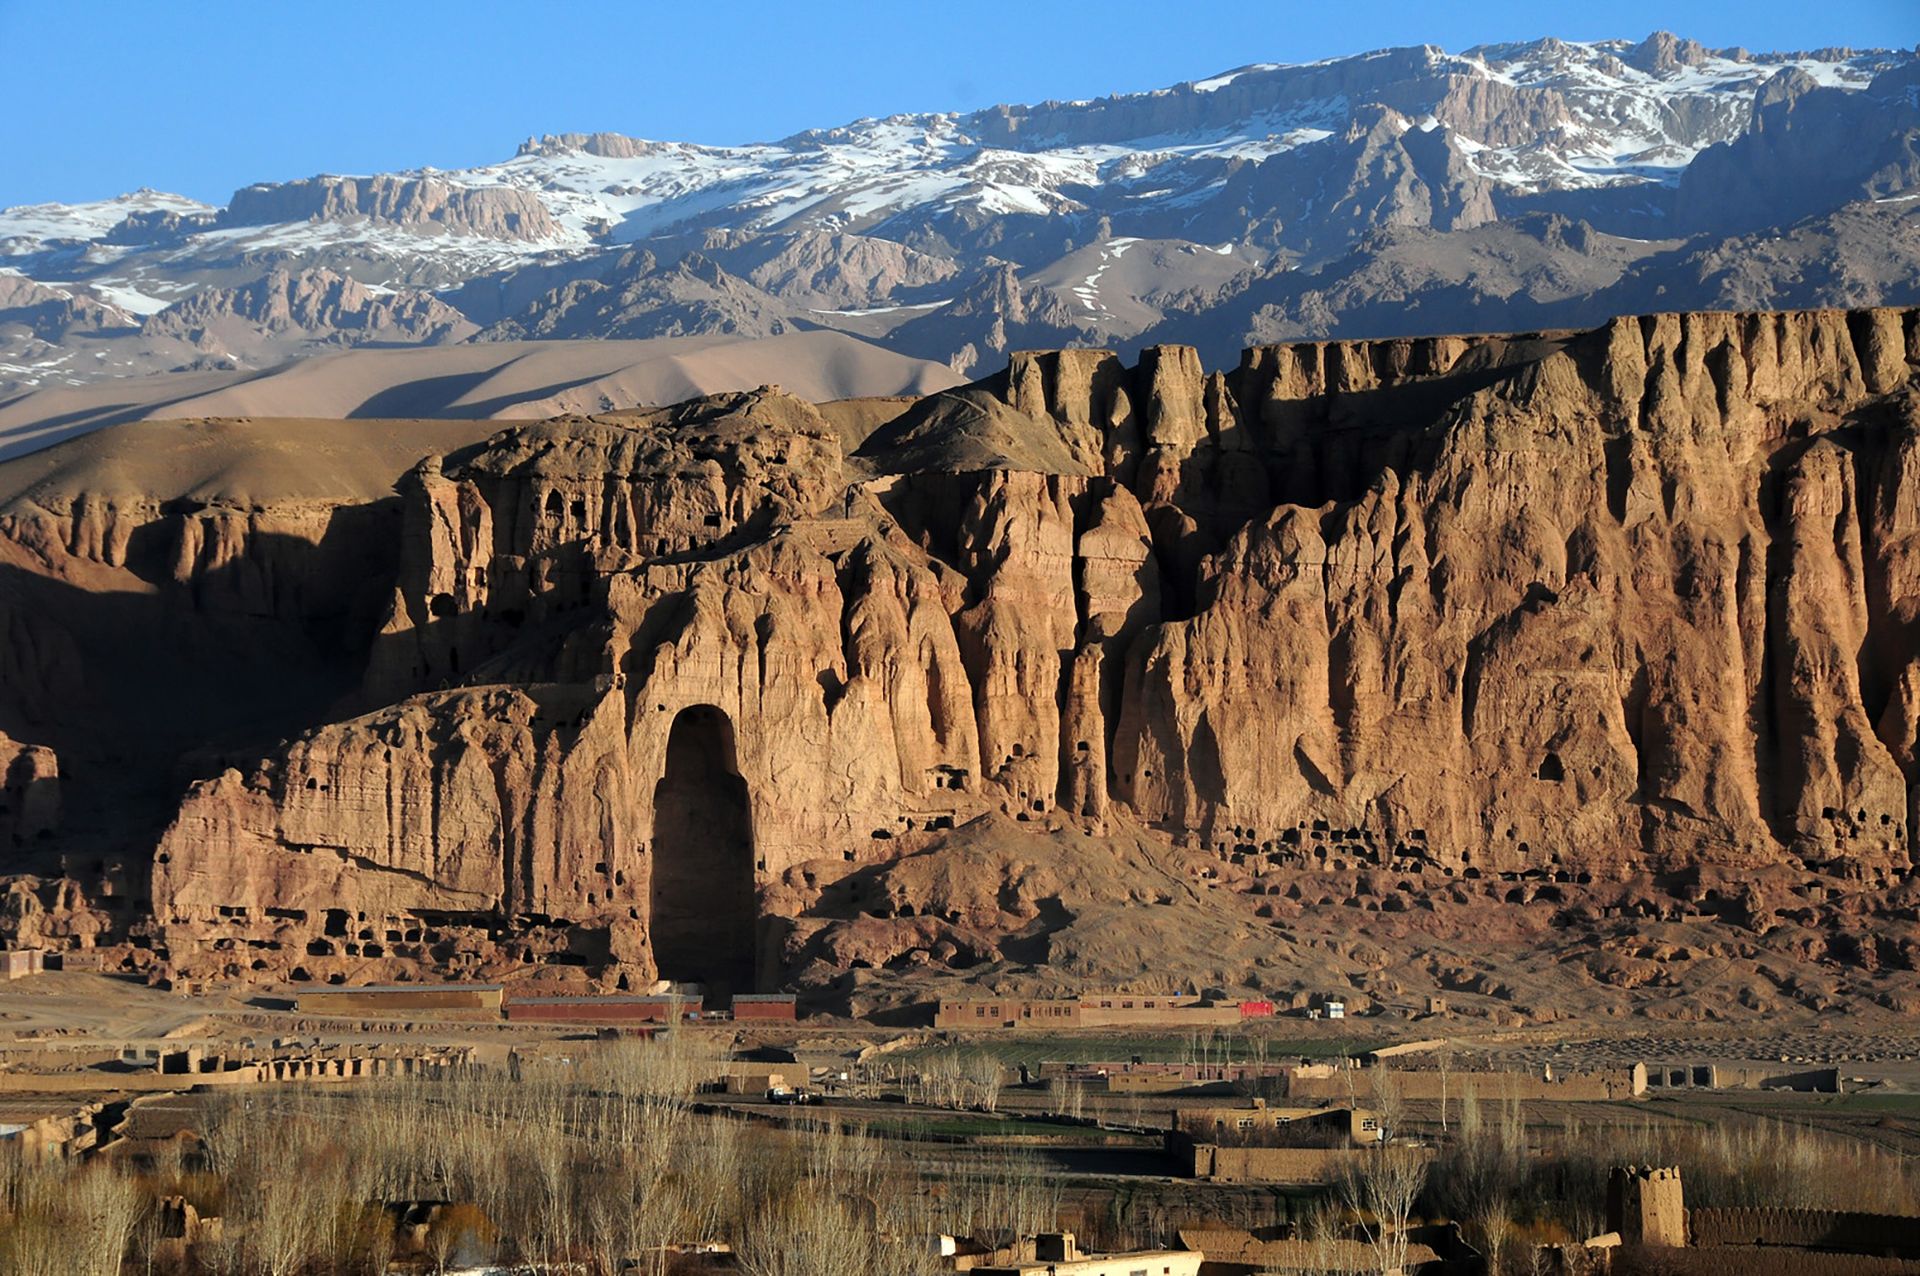 The Bamiyan Valley Photo by Afghanistan Matters, via Wikimedia Commons